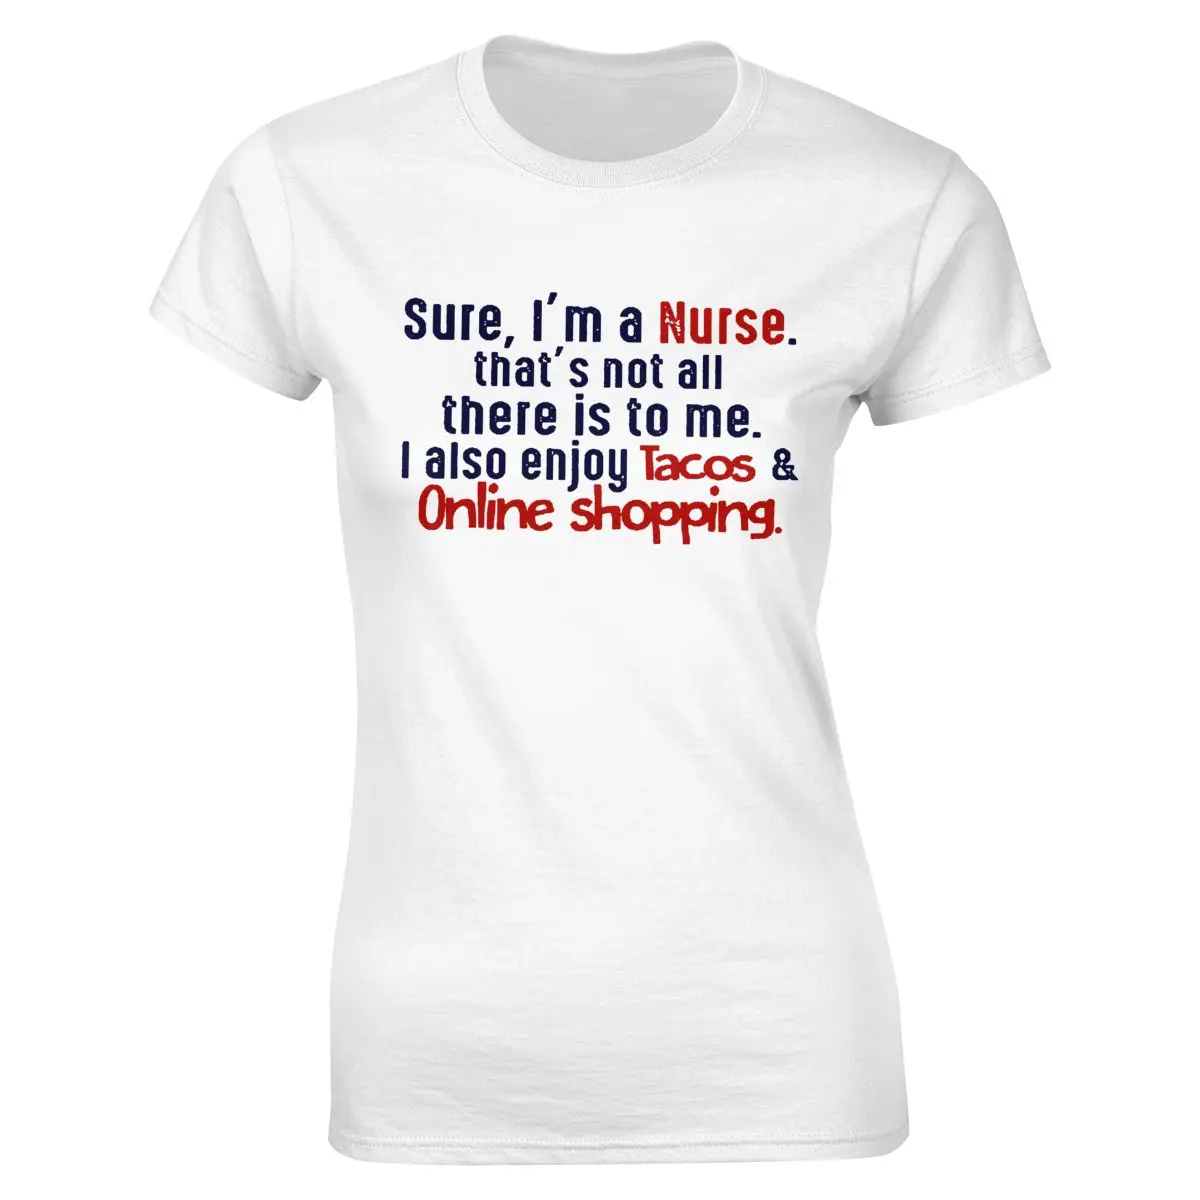 

Men T Shirt Sure I'm A Nurse That's Not All There Is To Me I Also Enjoy Tacos & Online Shopping Women T-shirt